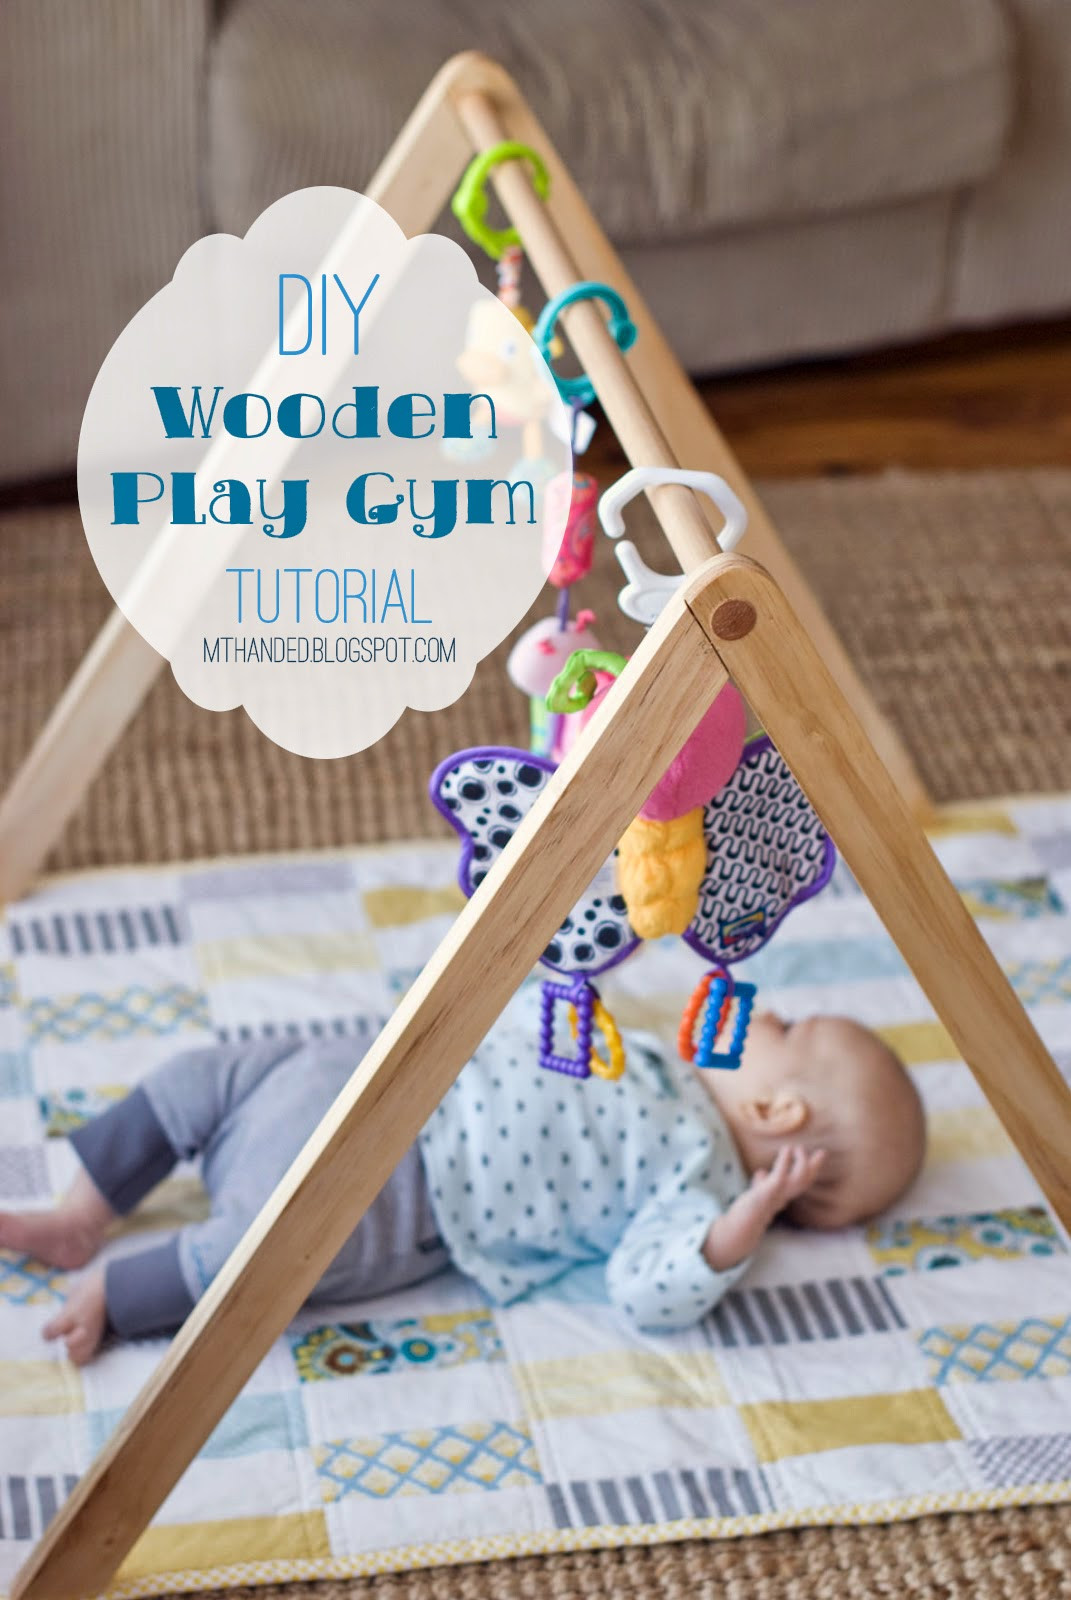 Toddler DIY Projects
 Empty Handed Wooden Baby Gym Tutorial